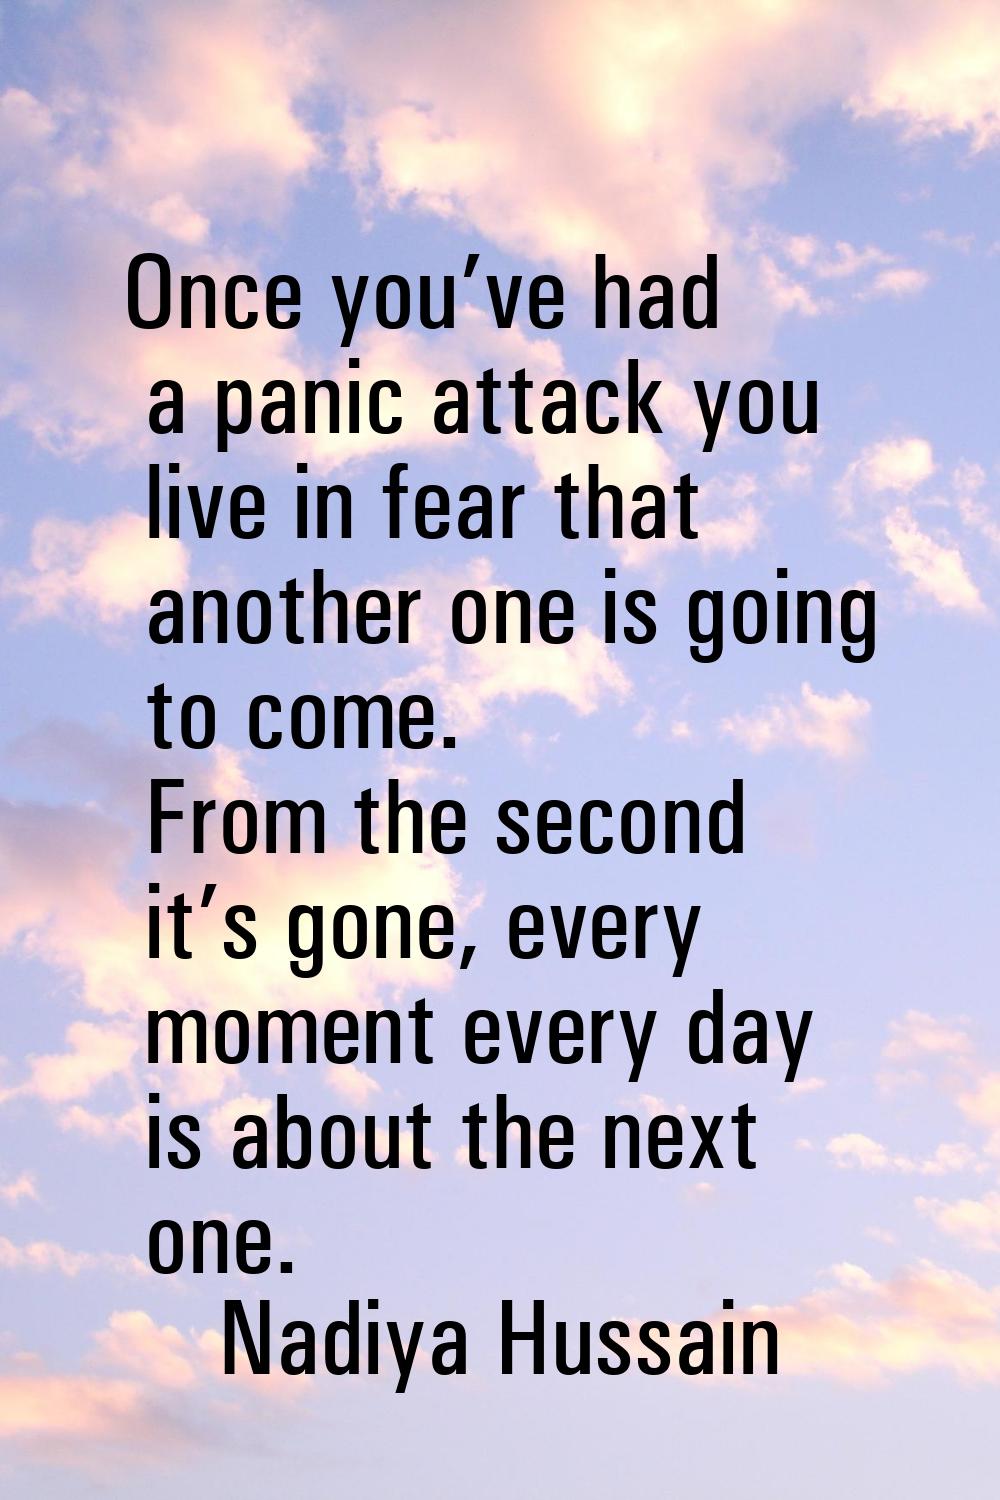 Once you’ve had a panic attack you live in fear that another one is going to come. From the second 